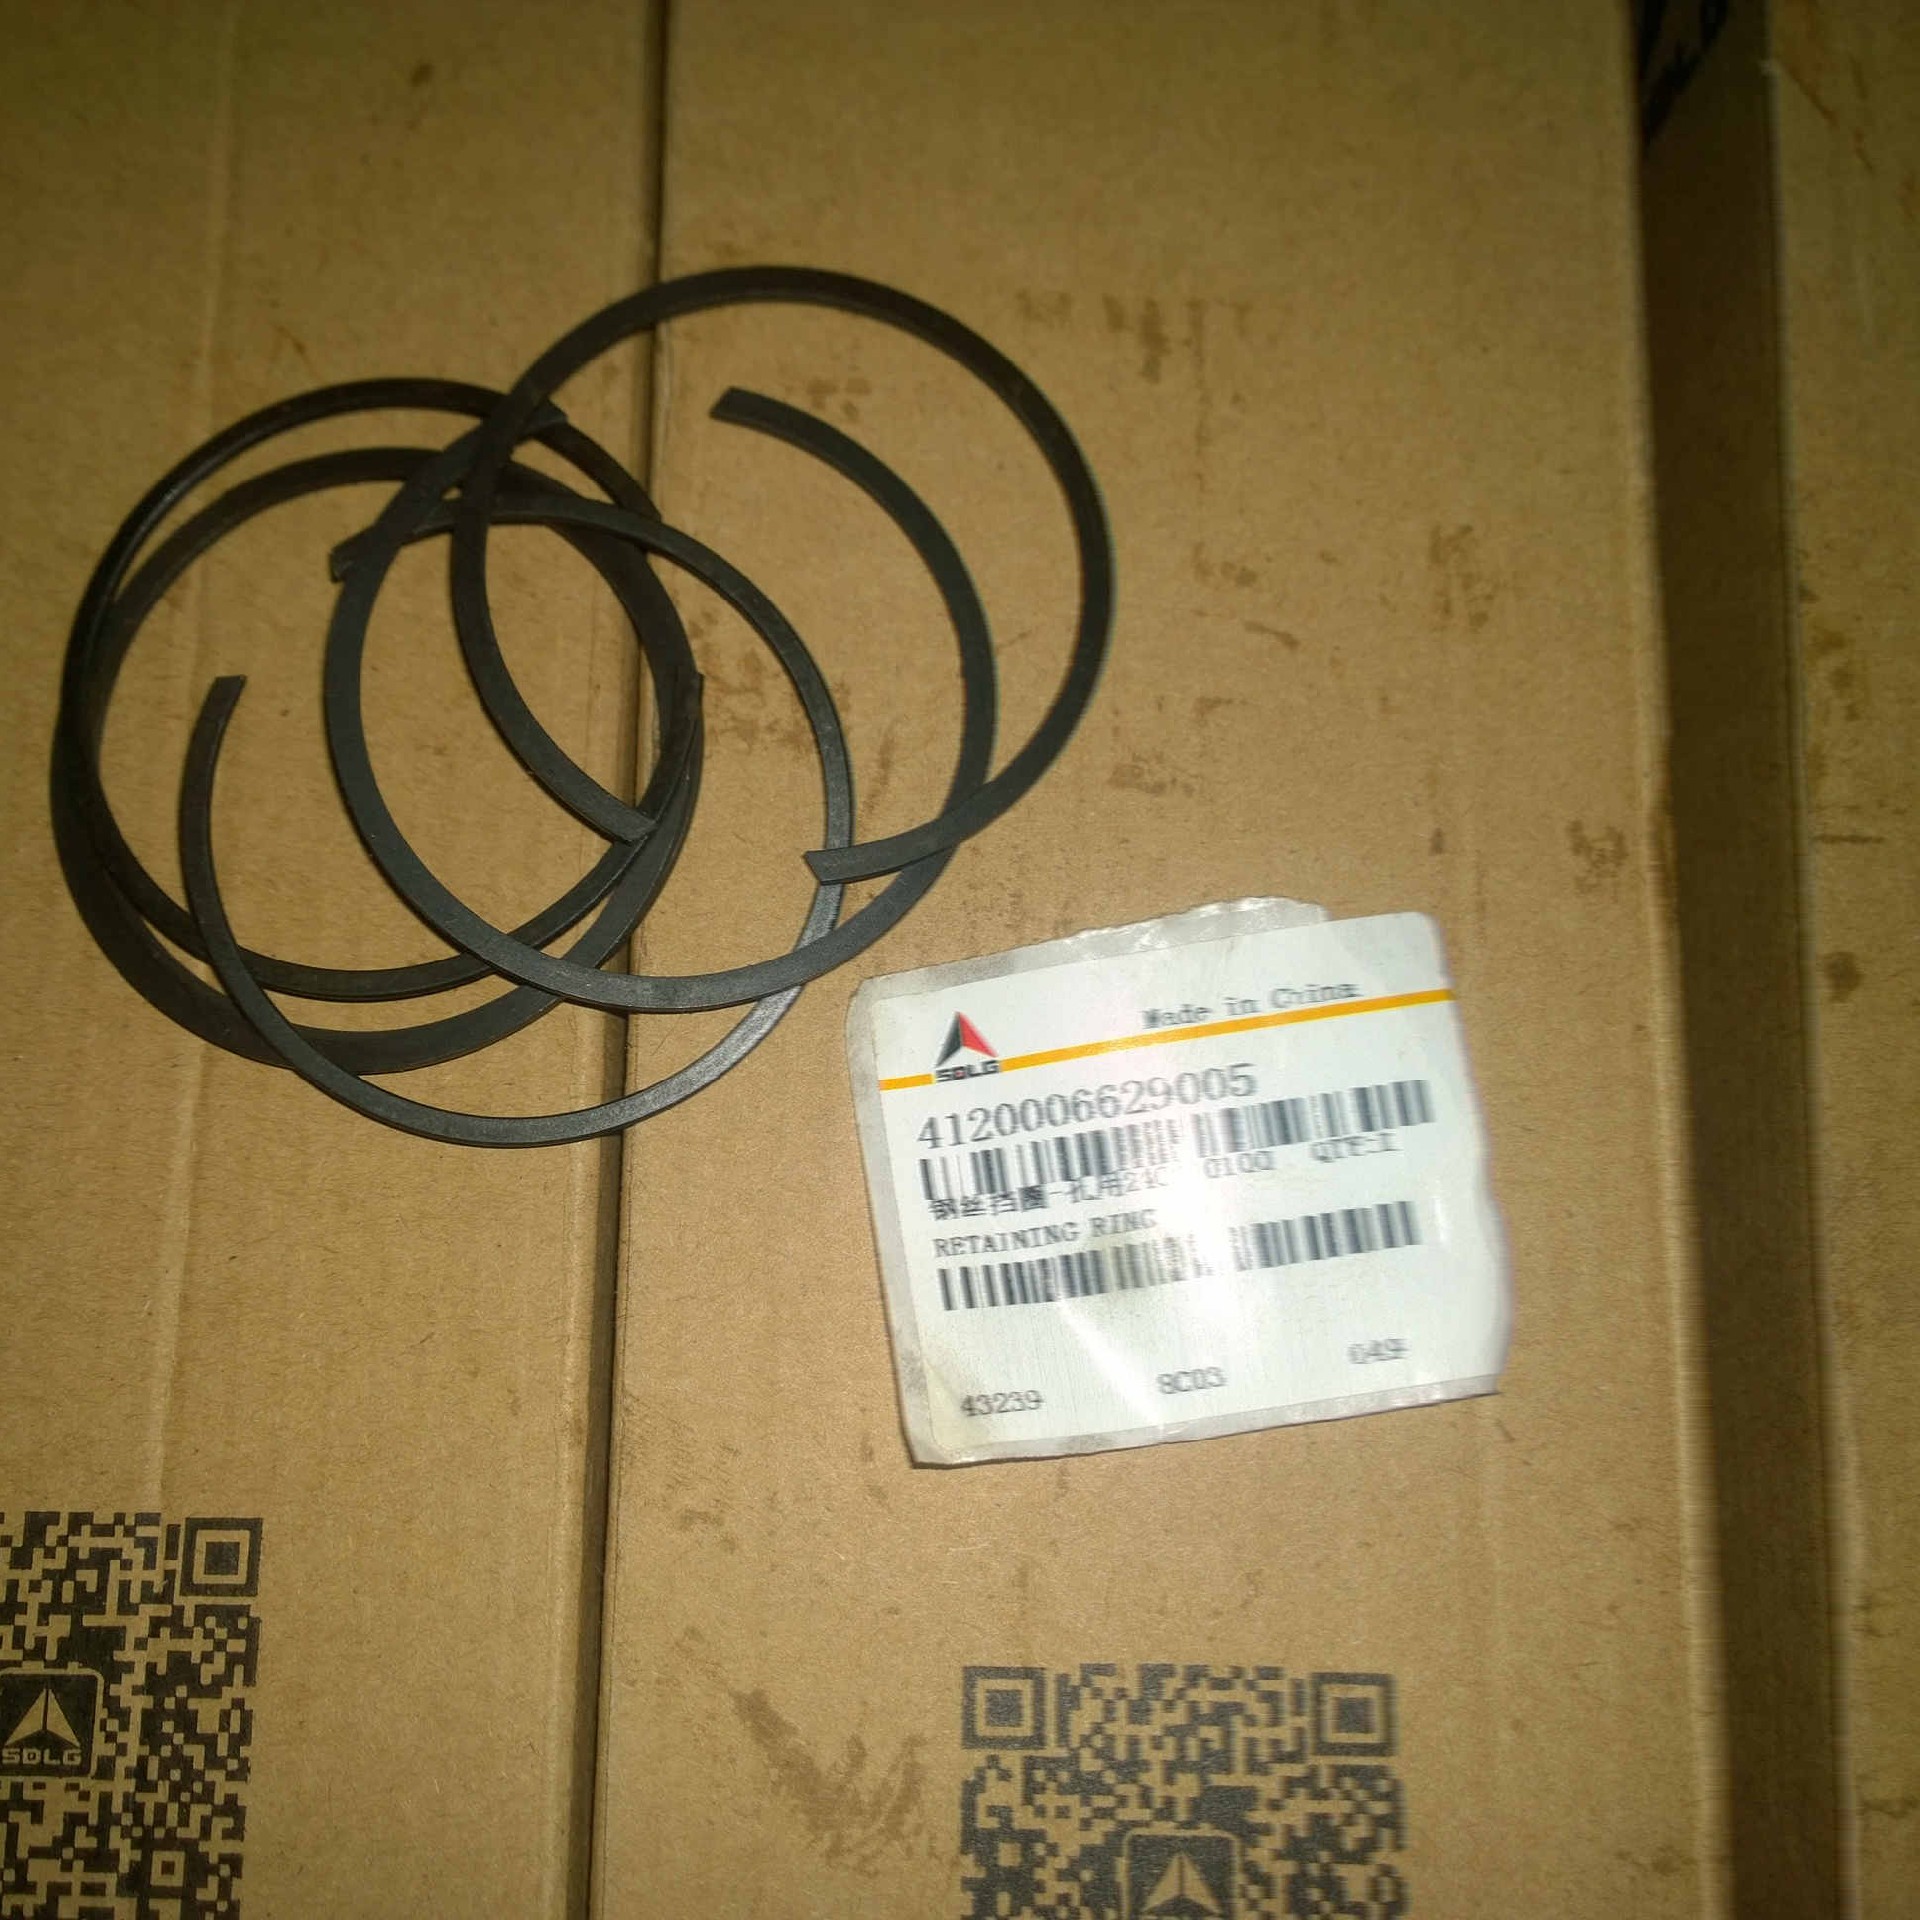 4120006629005 		Wire retaining ring